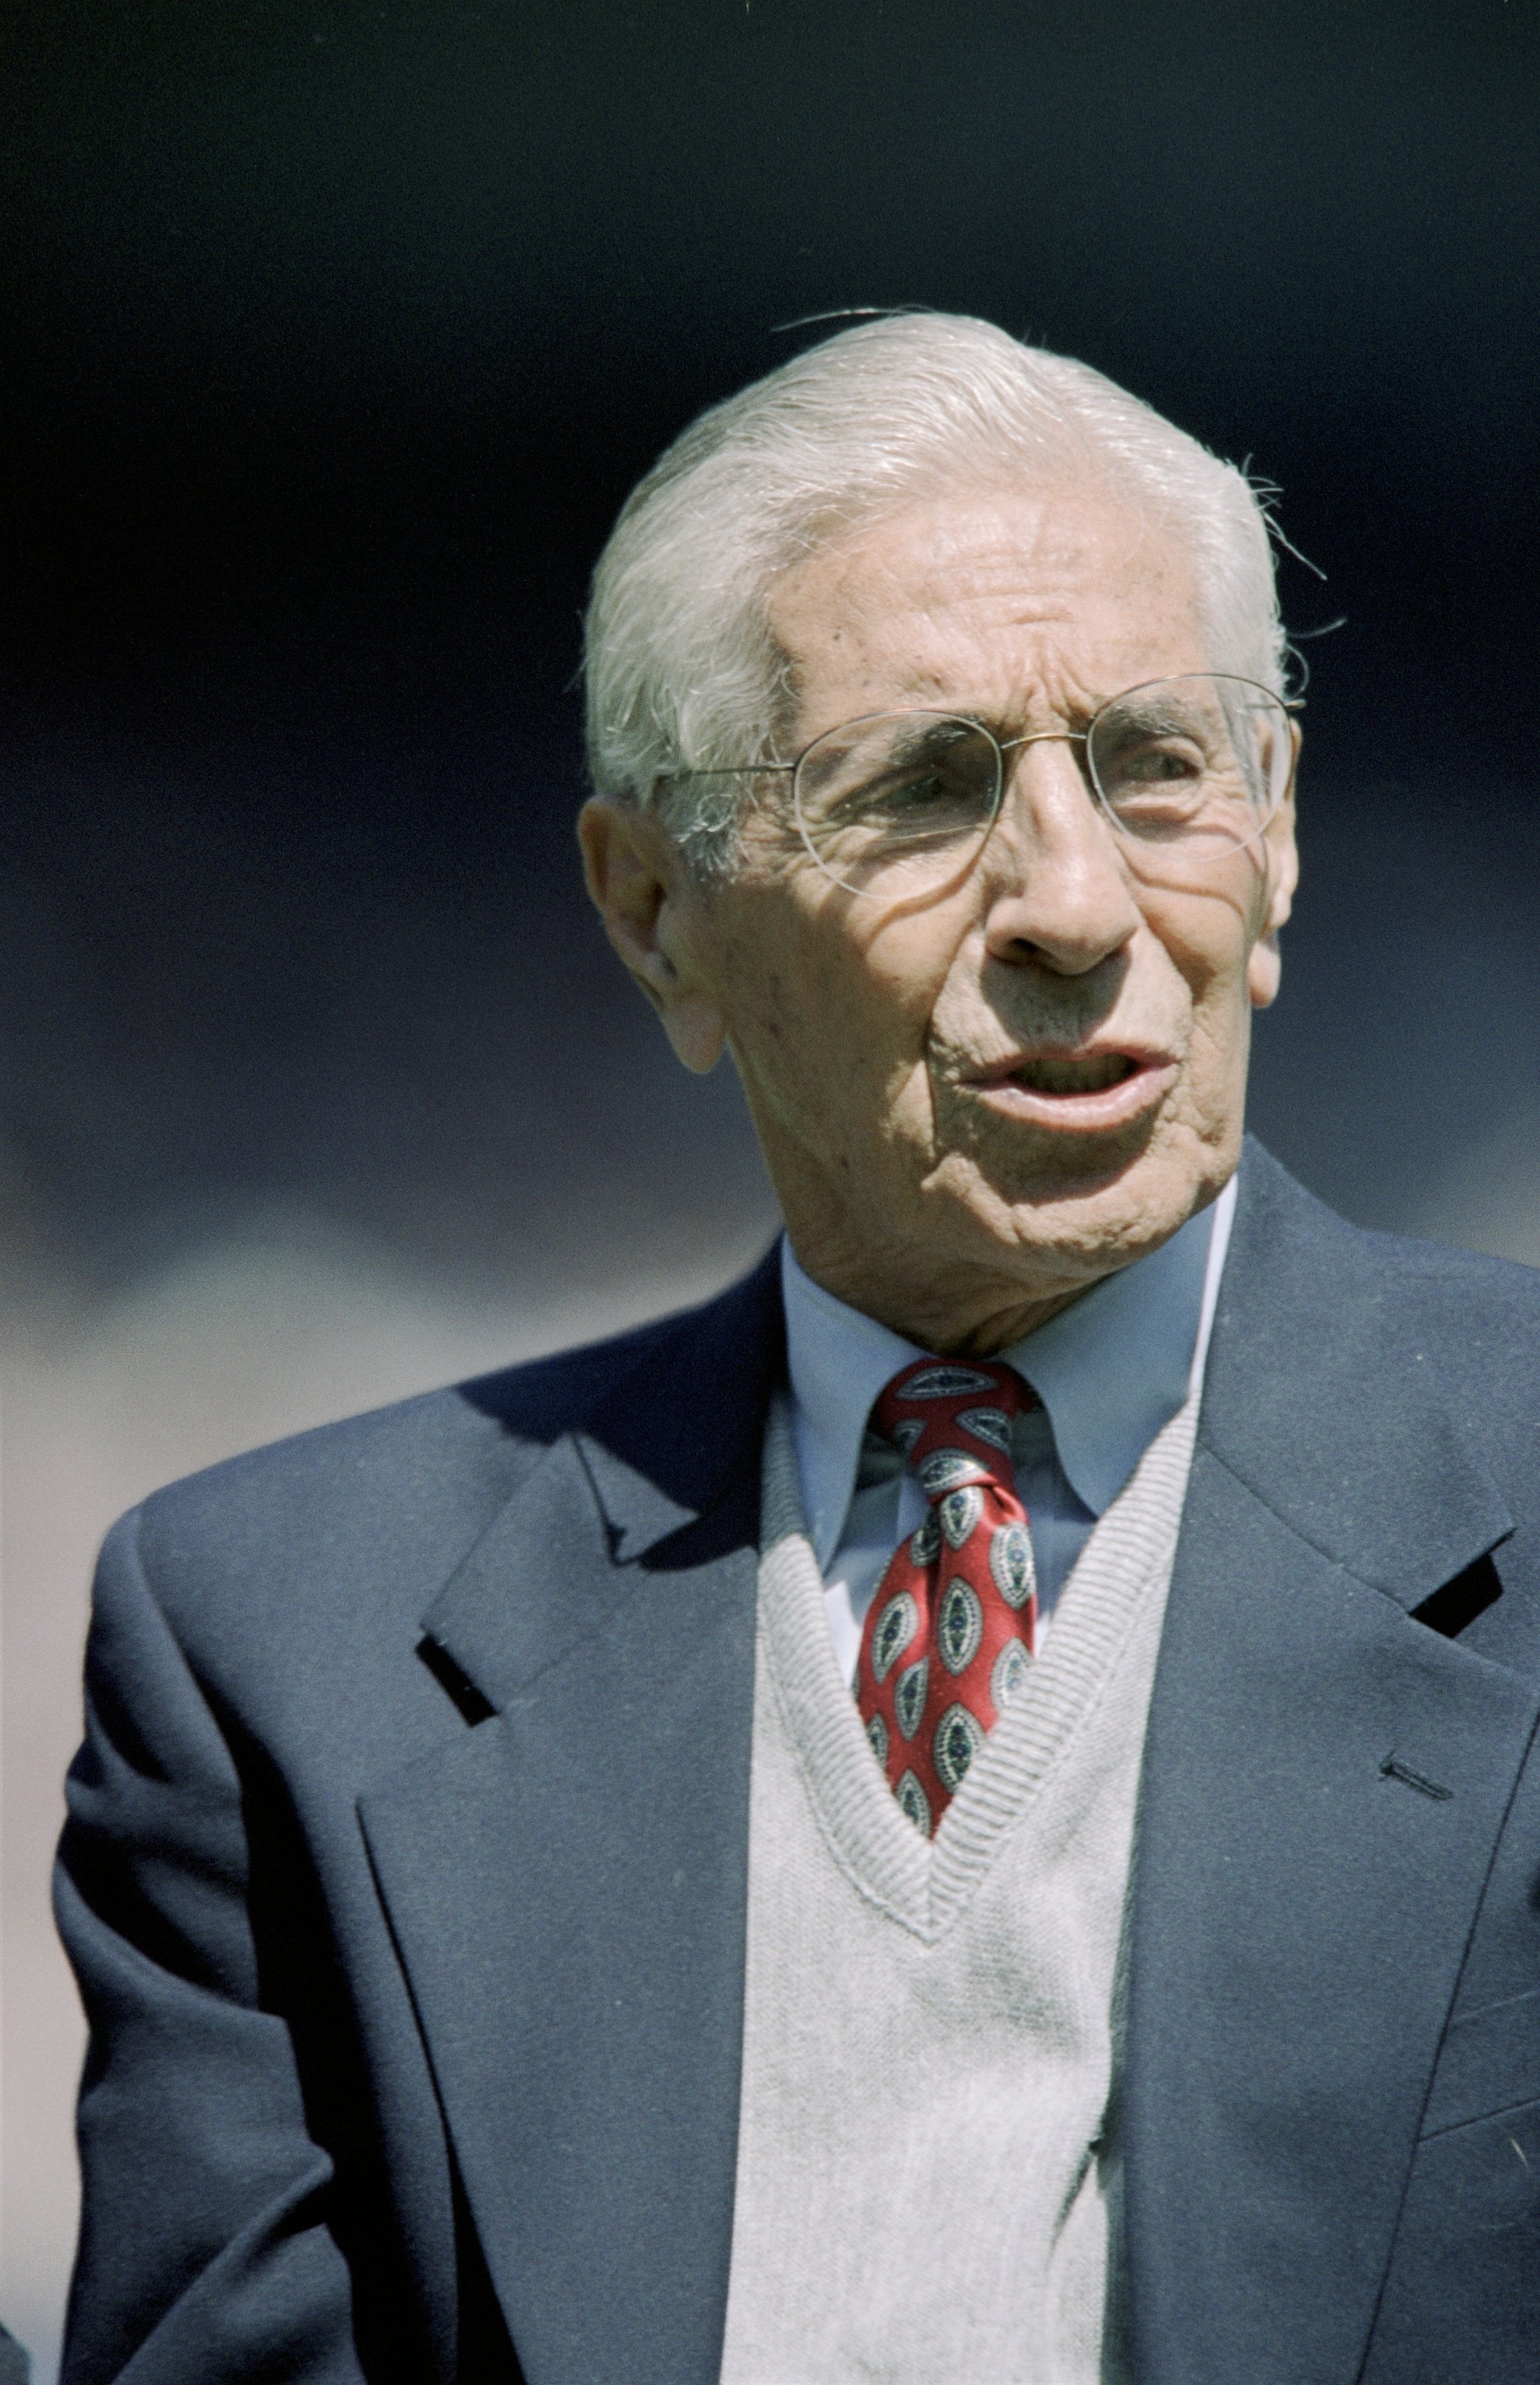 BRONX, NY - APRIL 25:  Former New York Yankee Phil Rizzuto looks on prior to the game between the Toronto Blue Jays and the New York Yankees on Joe DiMaggio Day  at Yankee Stadium on April 25, 1999 in Bronx, New York. The Yankees defeated the Blue Jays 4-